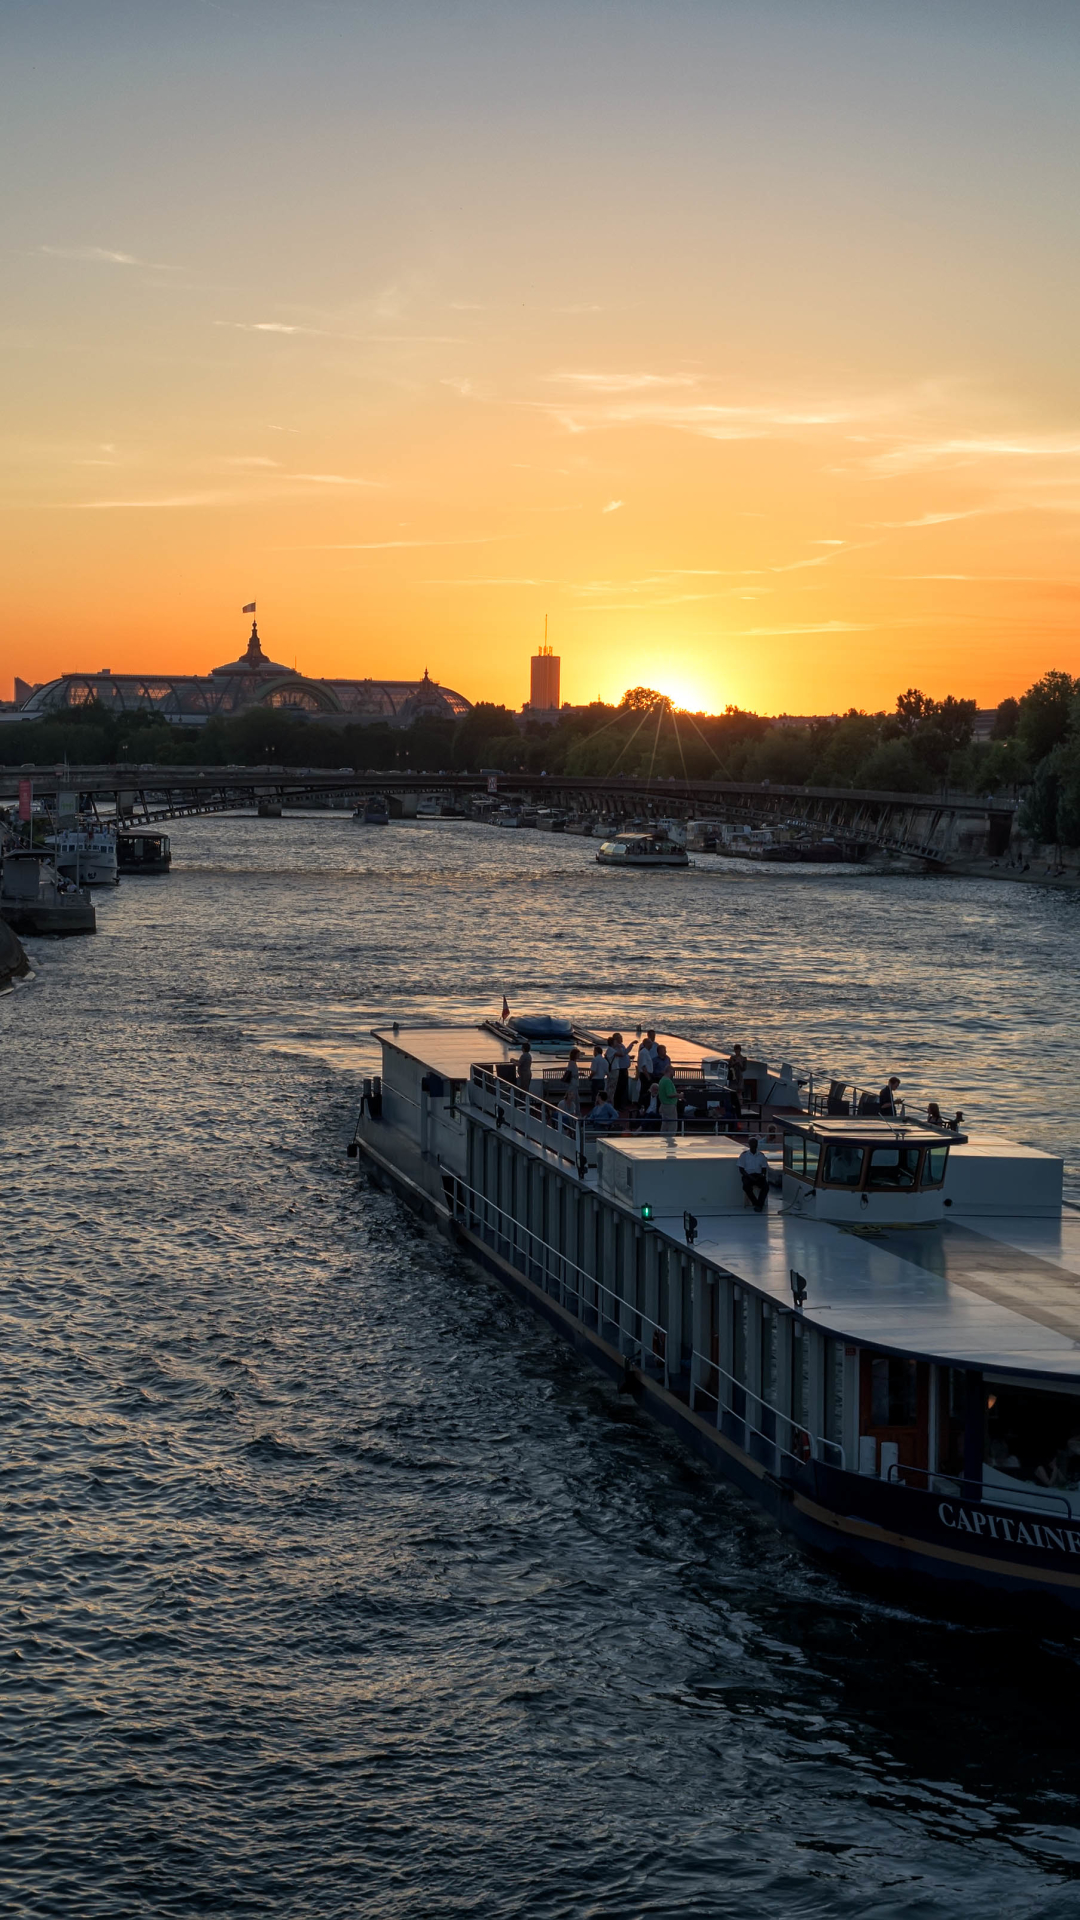 Sunset Cruise On The Capitaine Fracasse, Seine River Paris France (uploaded for cdd) by Joe deSousa